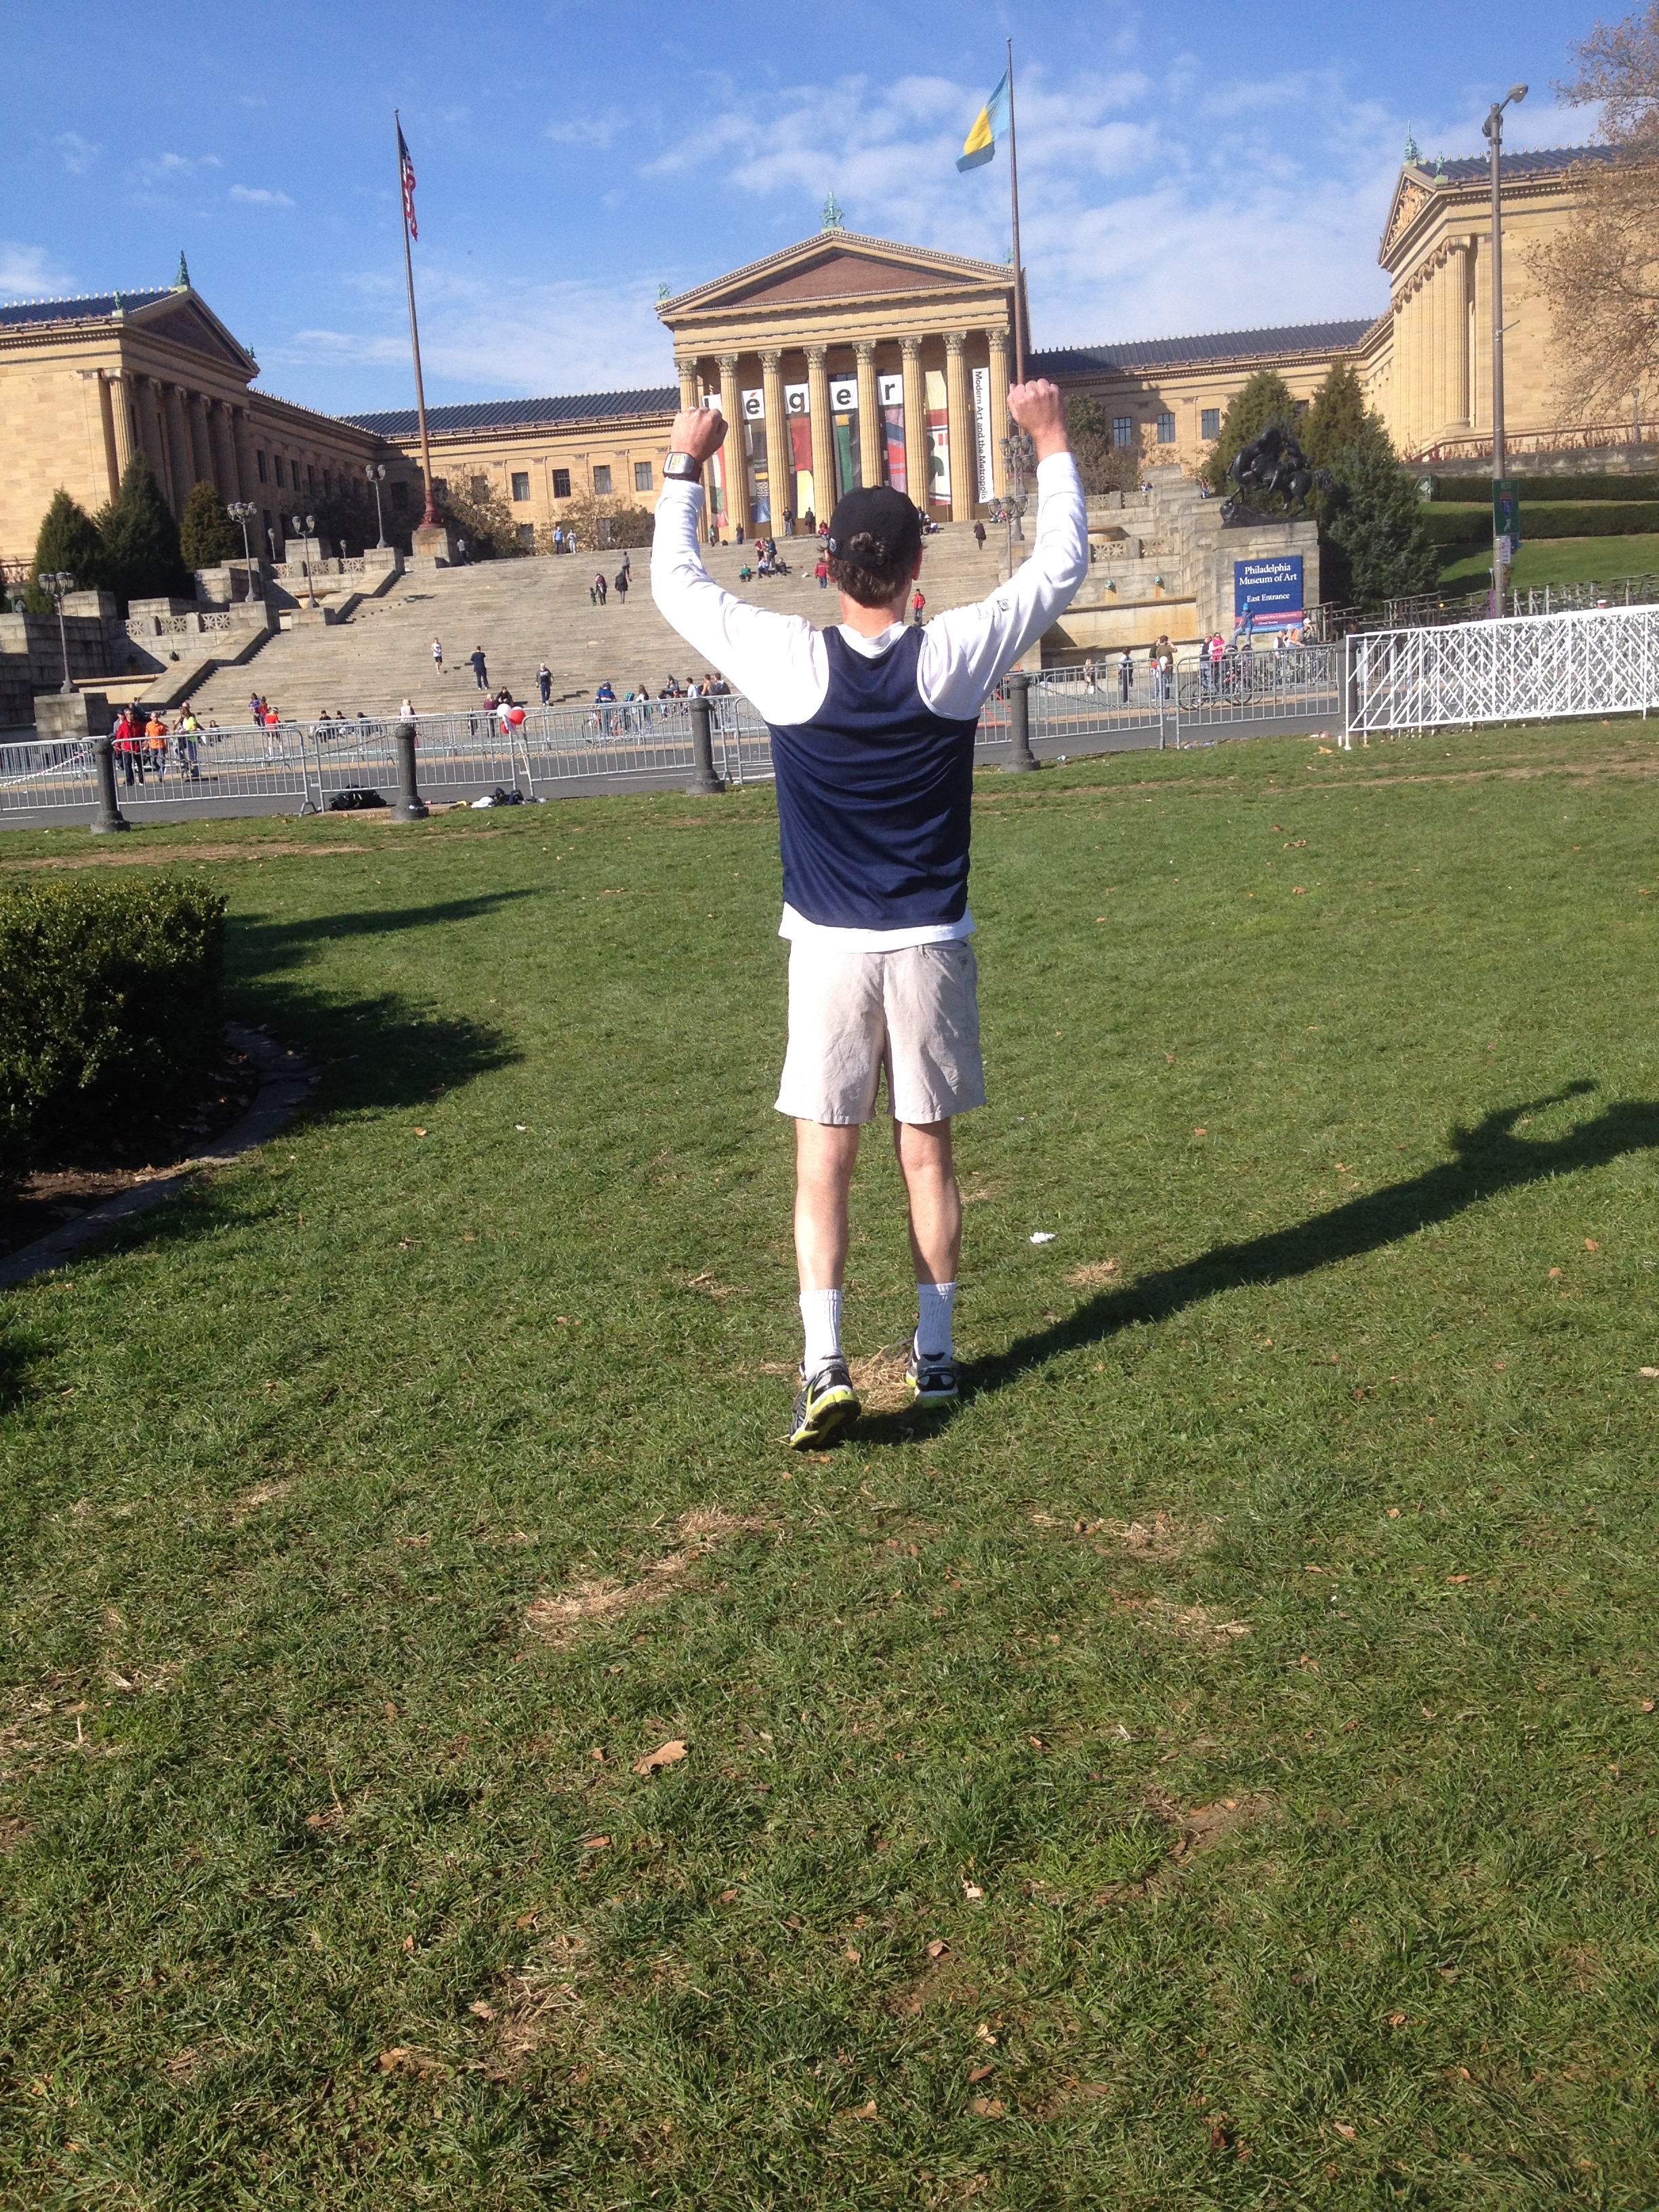 At the Rocky Steps